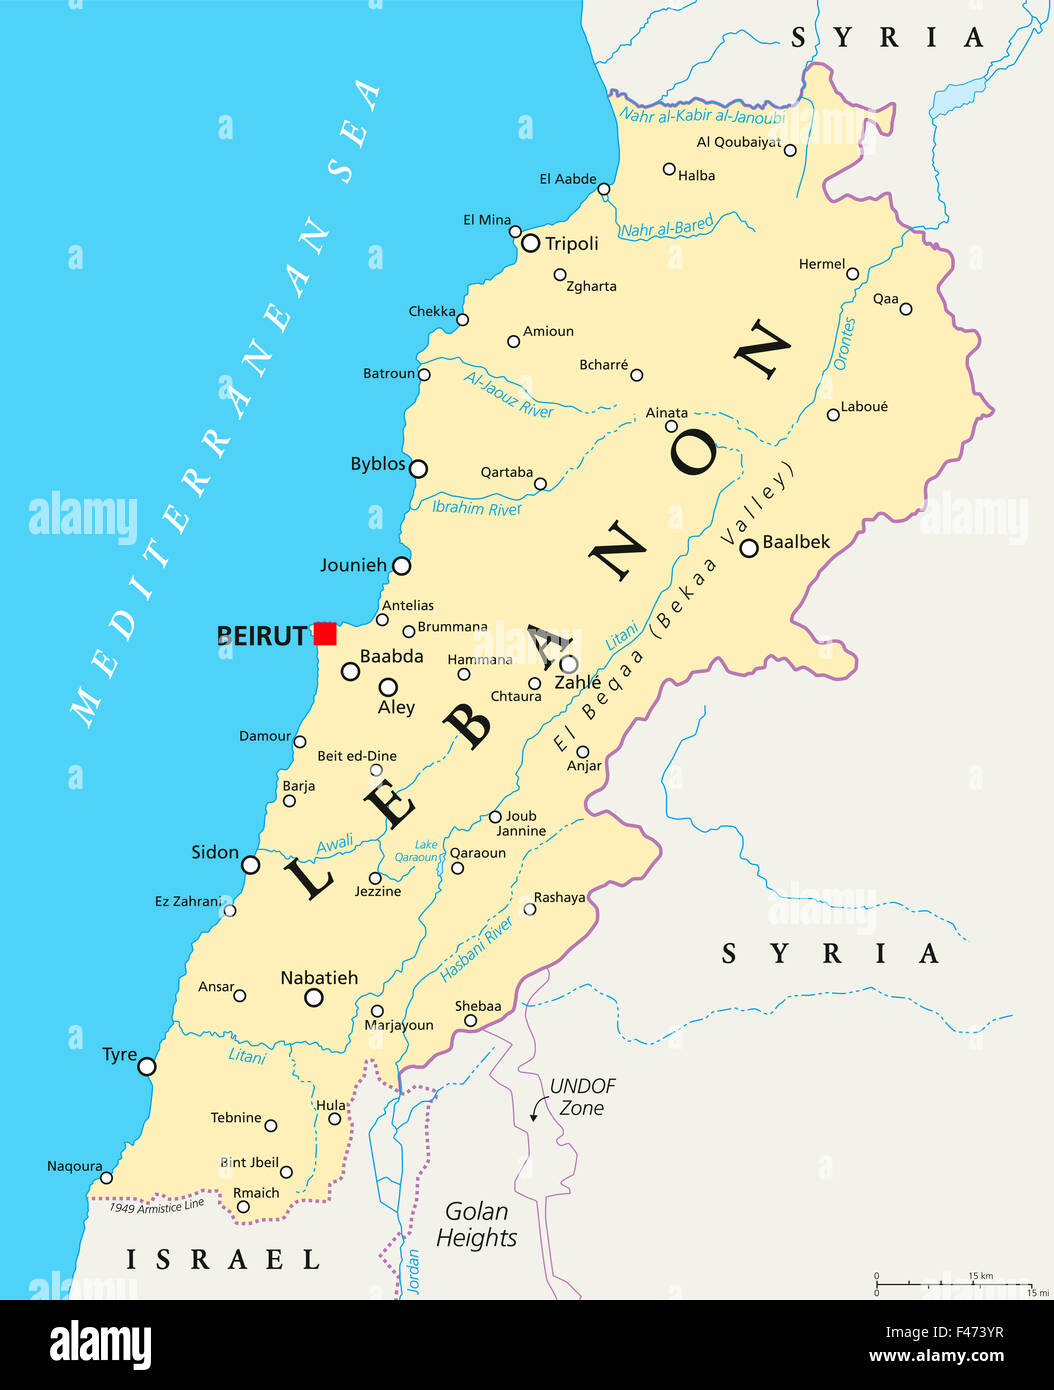 Lebanon Political Map With Capital Beirut National Borders Important F473YR 